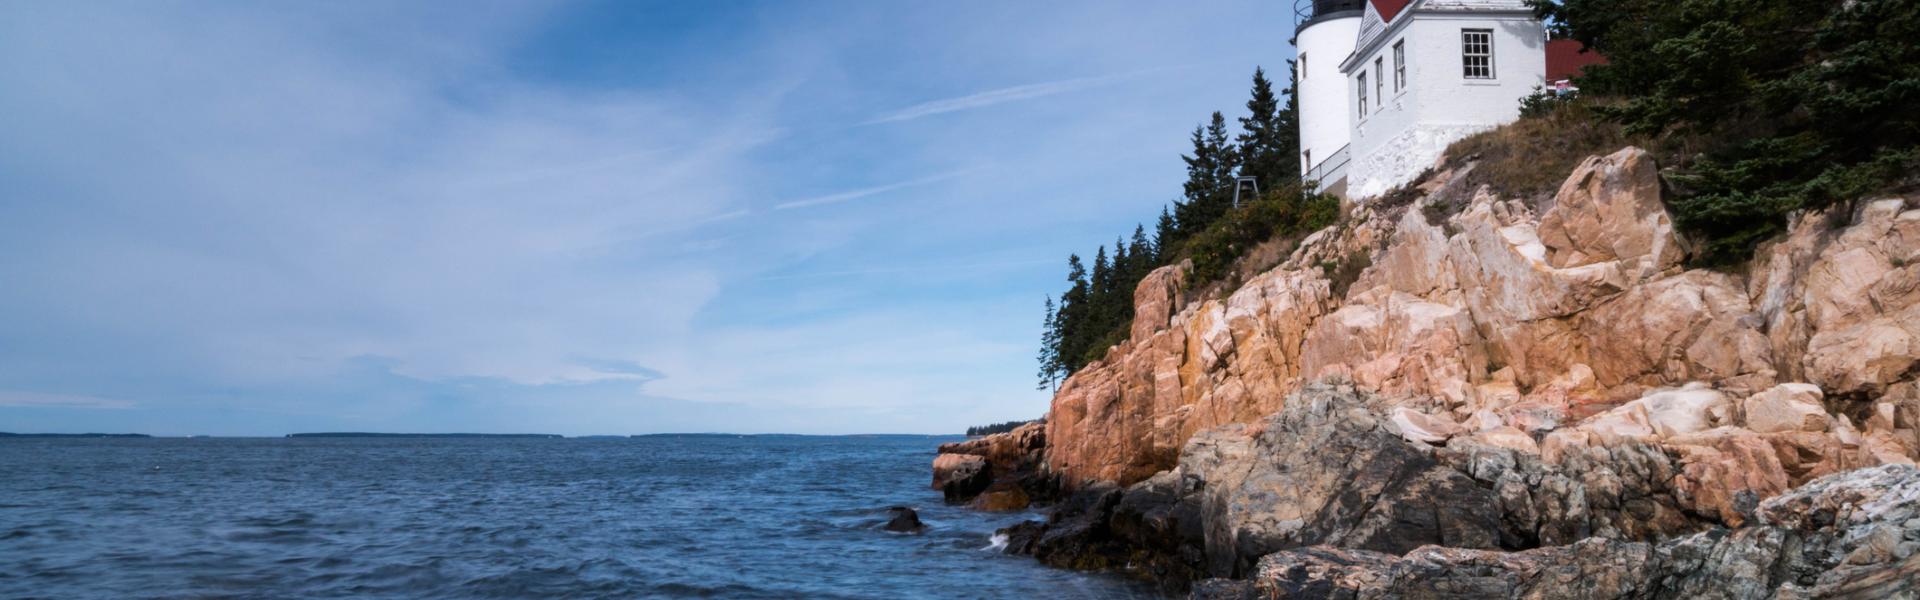 Top Destinations for a Weekend Getaway in Maine - HomeToGo